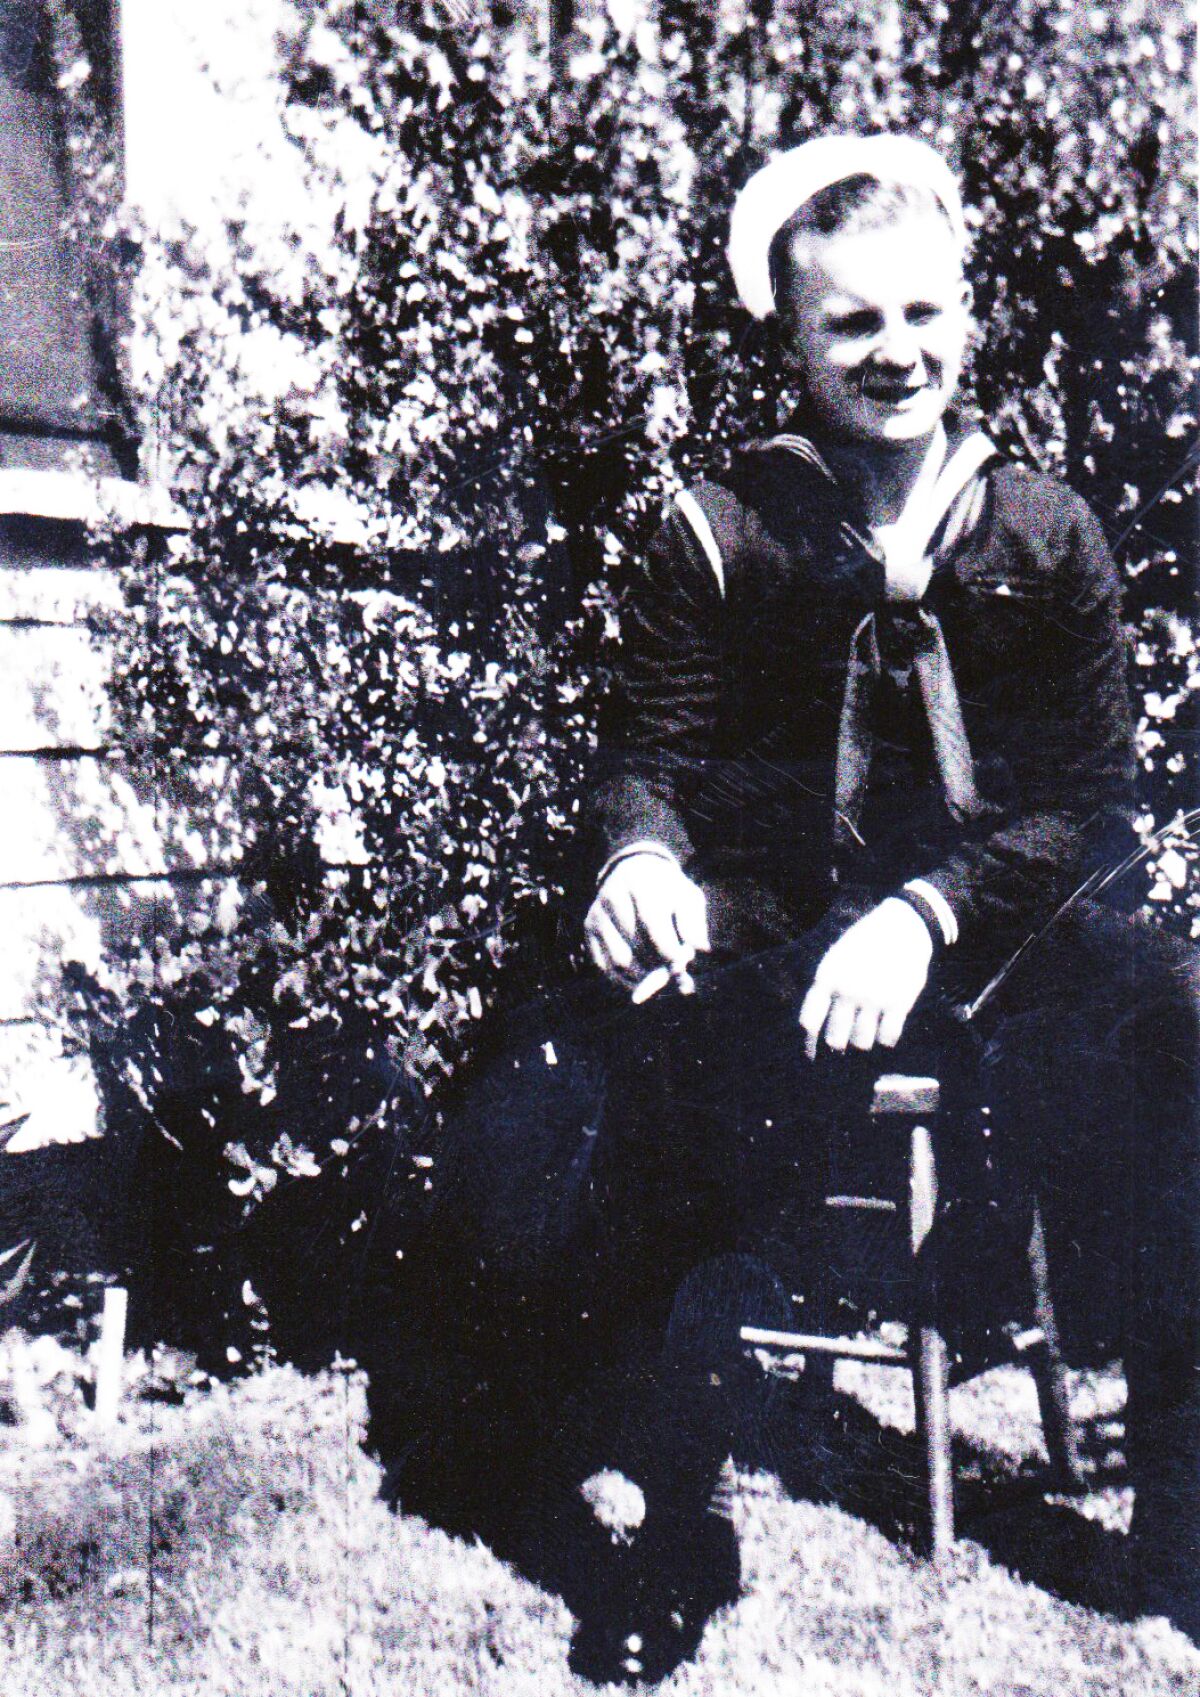 A photograph of San Diego sailor George Coburn taken in 1938, shortly after his enlistment in the U.S. Navy.